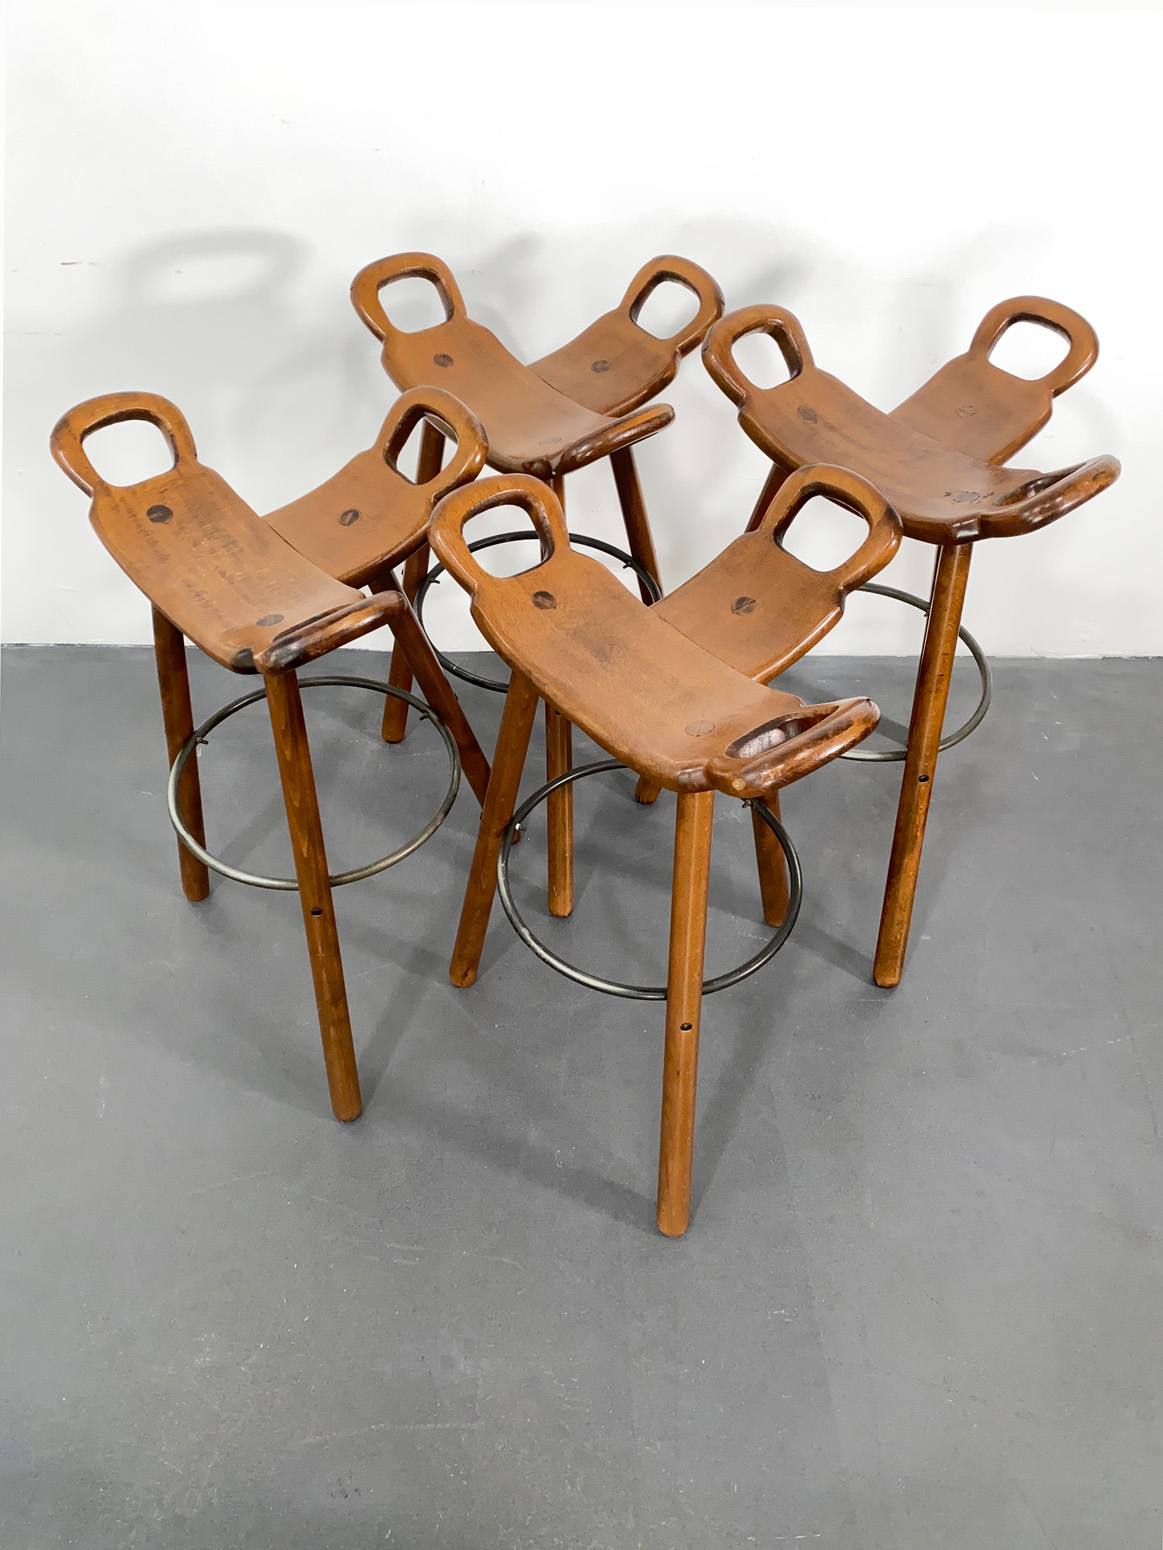 4 Mid Century Marbella Barstools by Sergio Rodrigues for Confonorm, Spain, 1970s.